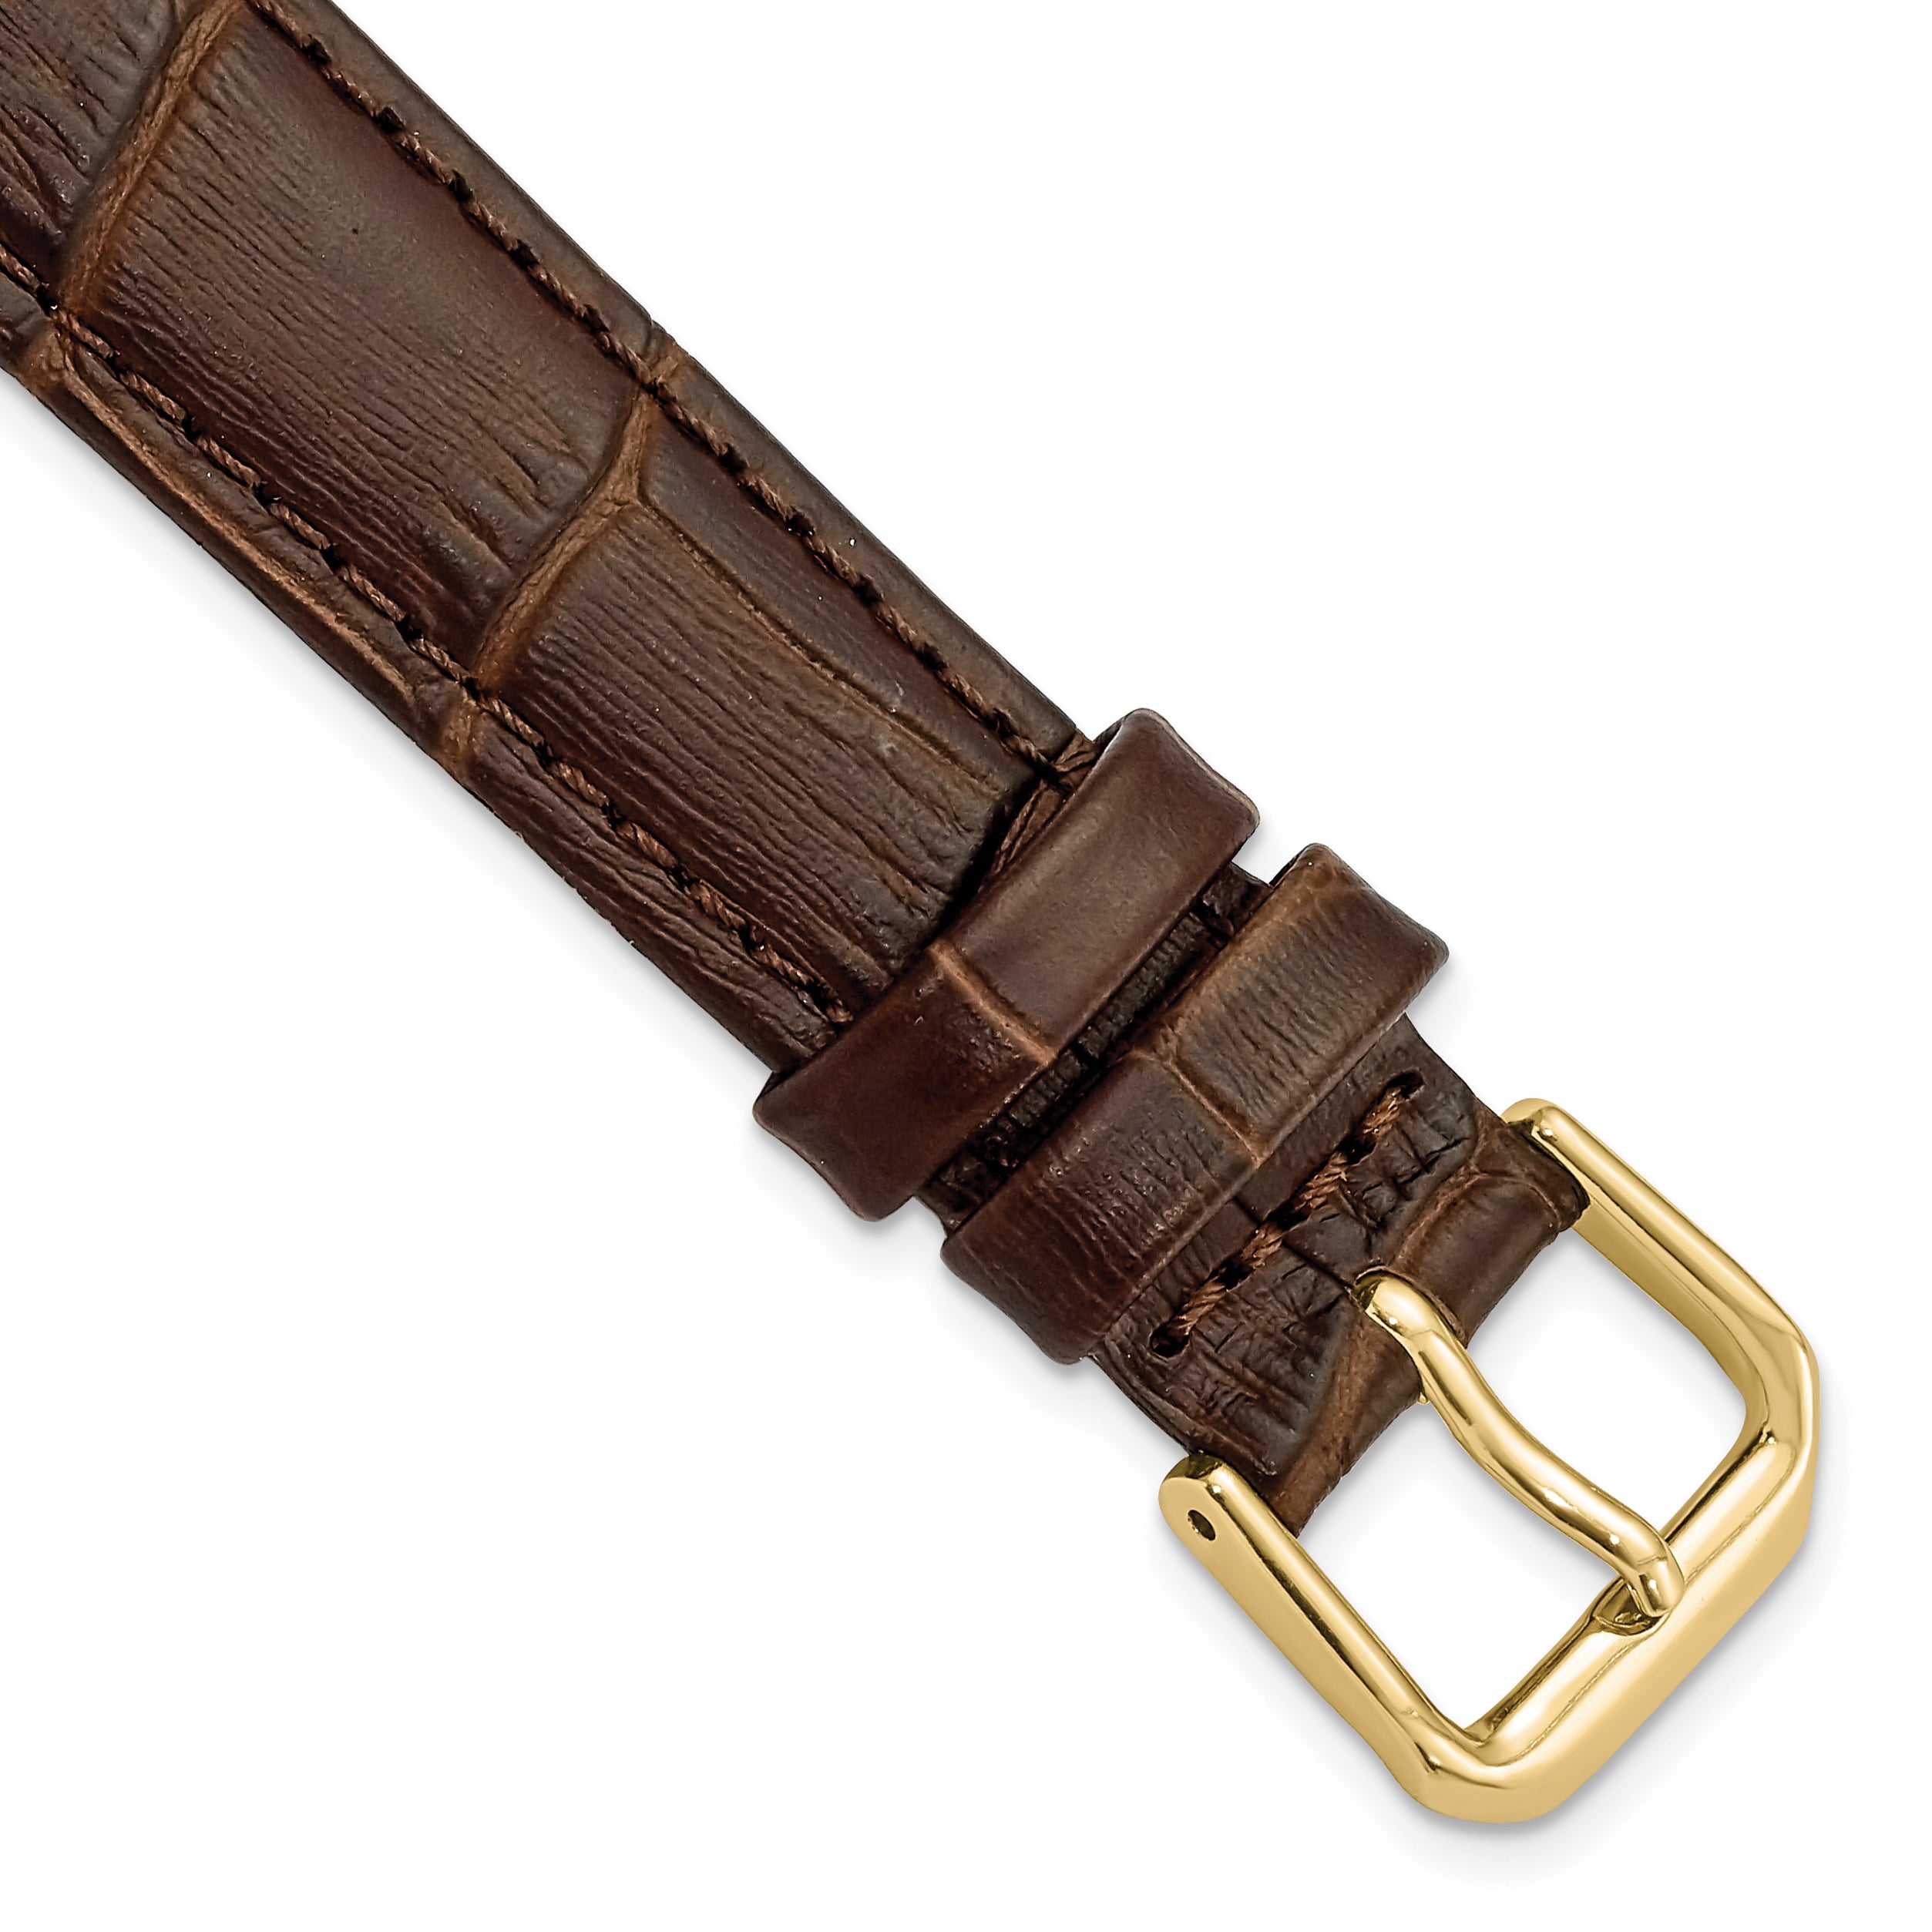 DeBeer 16mm Brown Matte Wild Alligator Grain Leather with Gold-tone Buckle 7.5 inch Watch Band